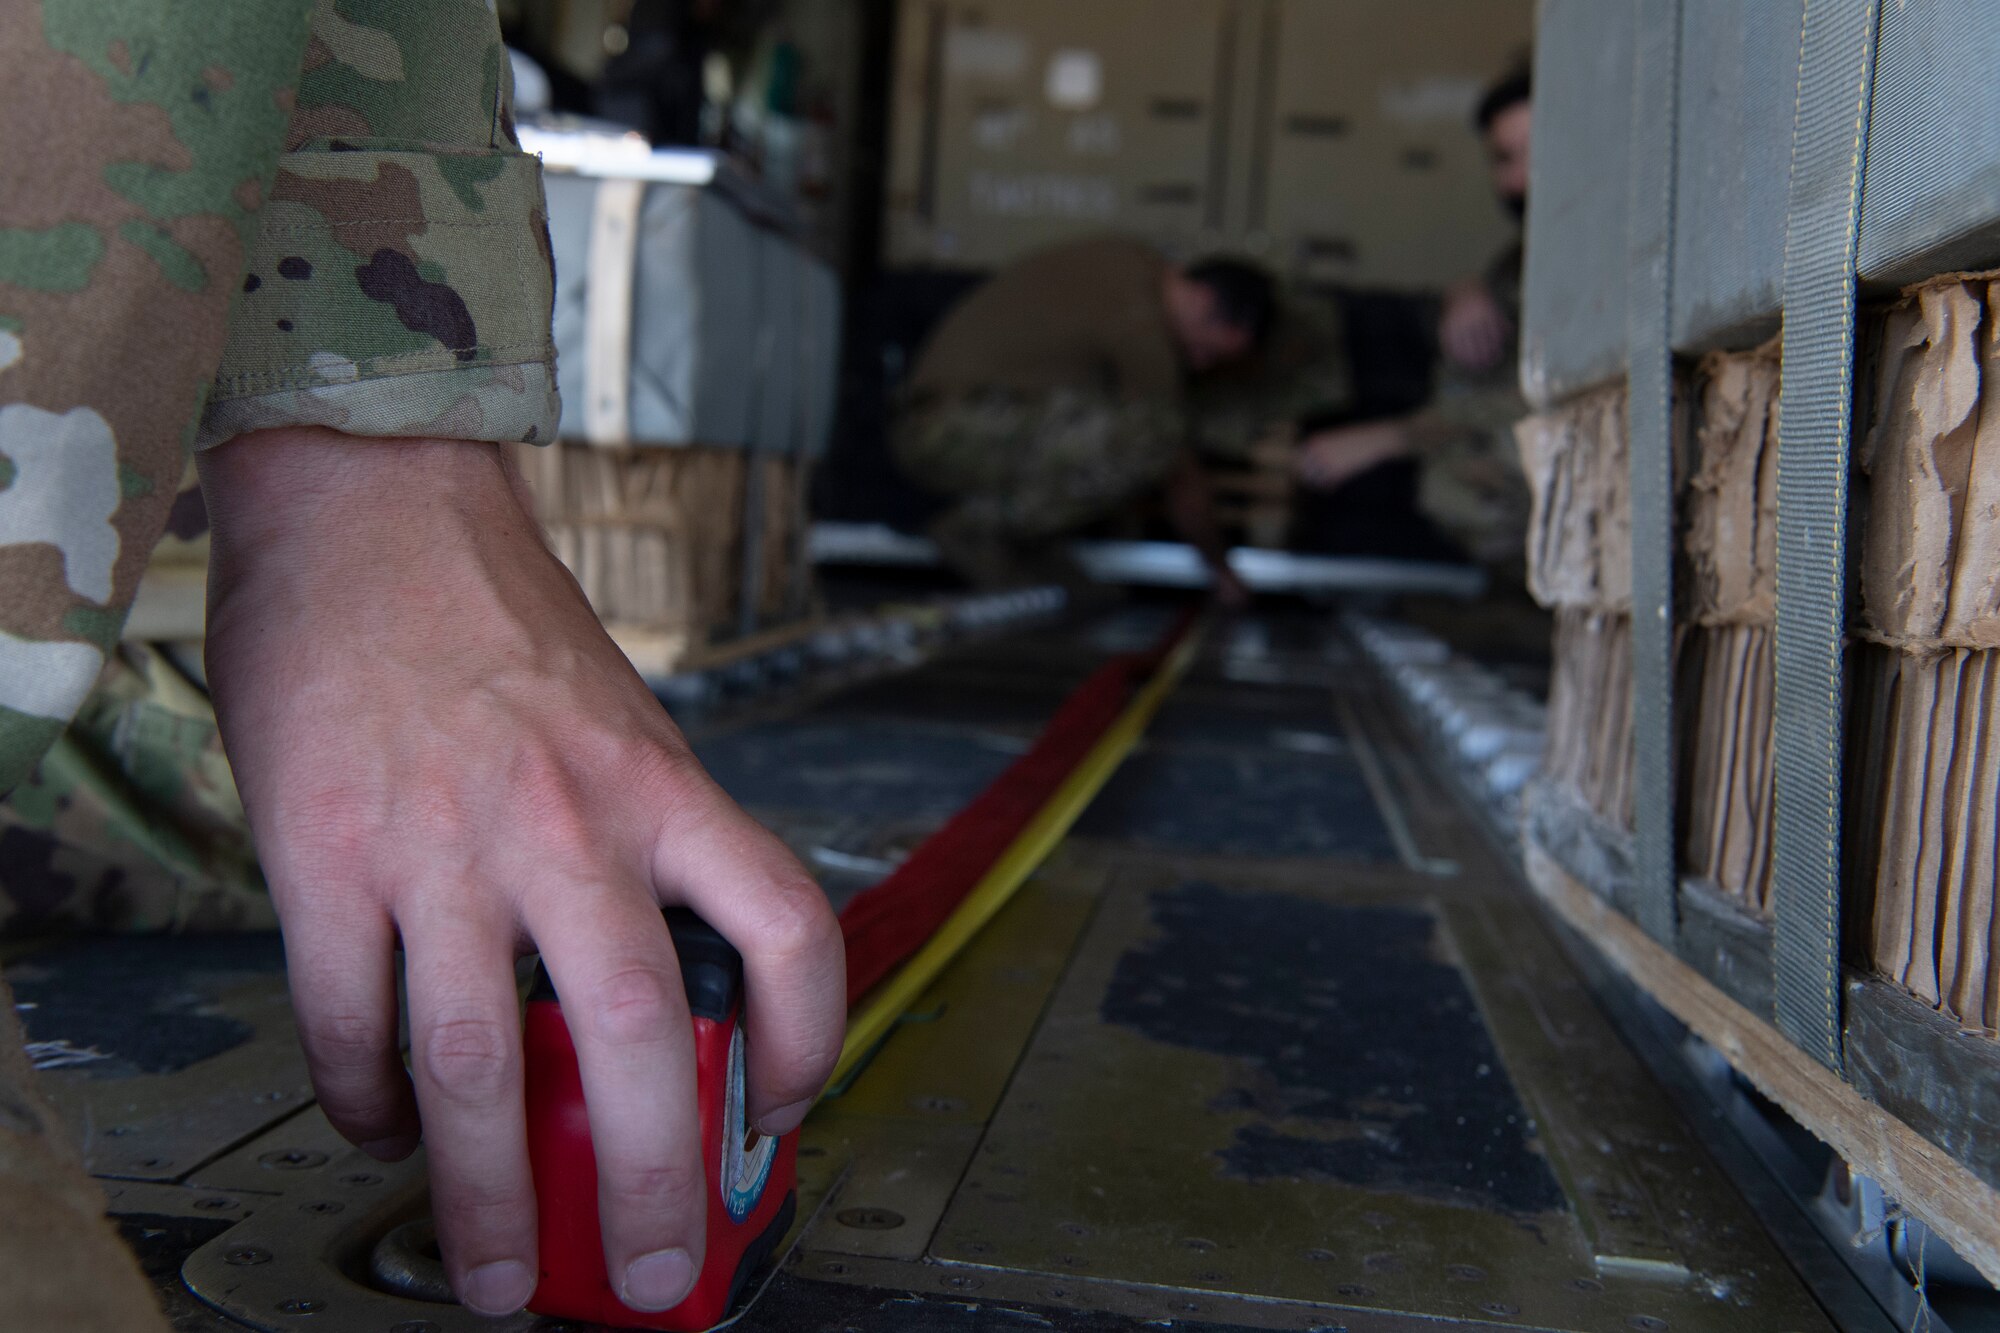 Airman 1st Class Cameron Bou, 41st Airlift Squadron loadmaster, prepares a C-130J Super Hercules for loading operations during pre-deployment training at Montrose Regional Airport, Colorado, July 27, 2020. This training is part of the 4/12 deployment initiative, which was developed in 2019 between airlift squadrons from Dyess Air Force Base, Texas and Little Rock AFB, allowing each squadron a full year of dwell time followed by a four-month rotation to their respective area of responsibility. (U.S. Air Force photo by Airman 1st Class Aaron Irvin)